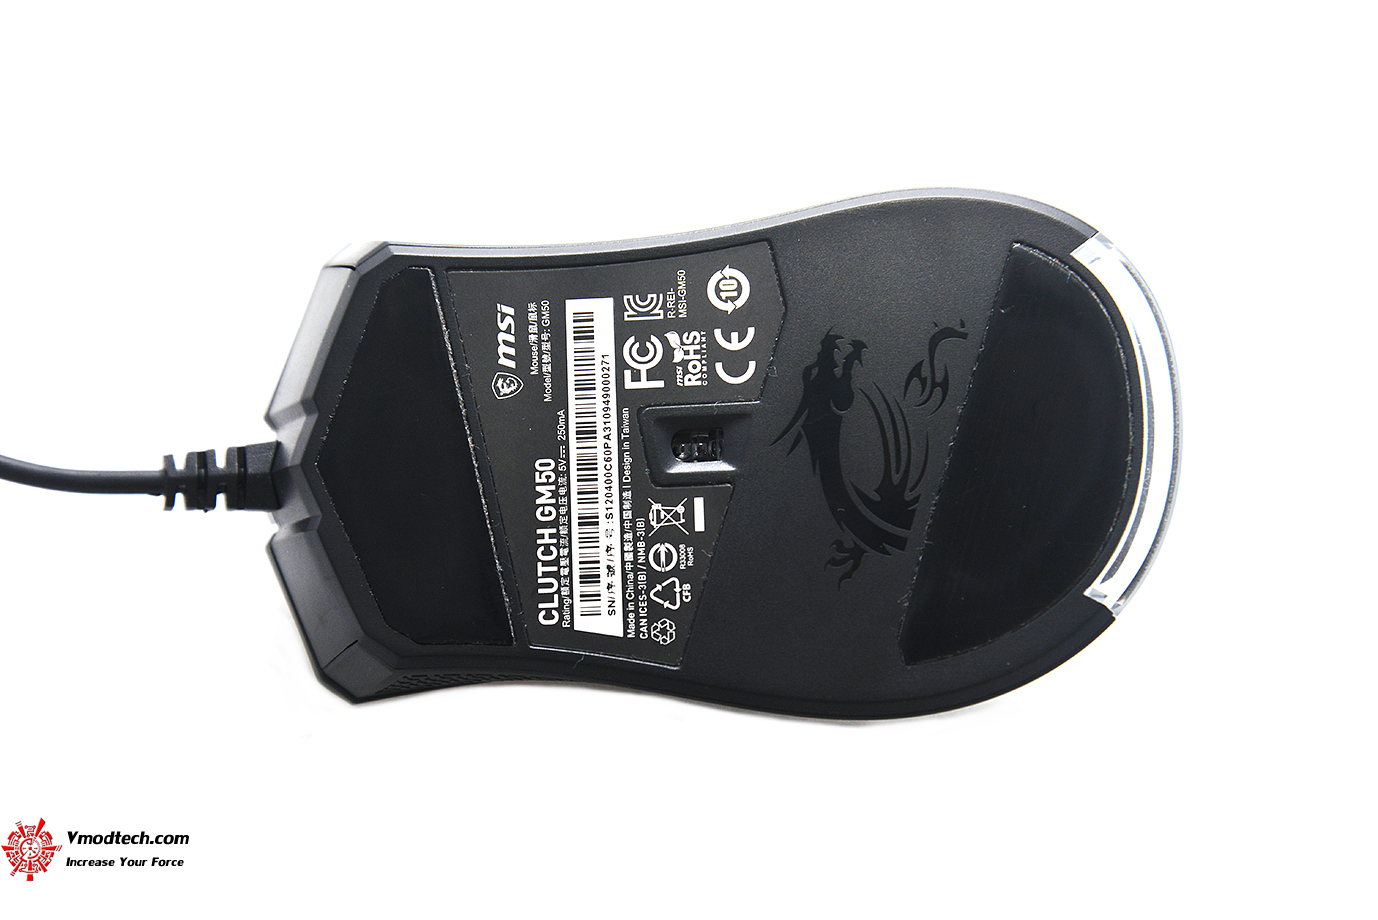 dsc 4933 MSI CLUTCH GM50 GAMING MOUSE REVIEW